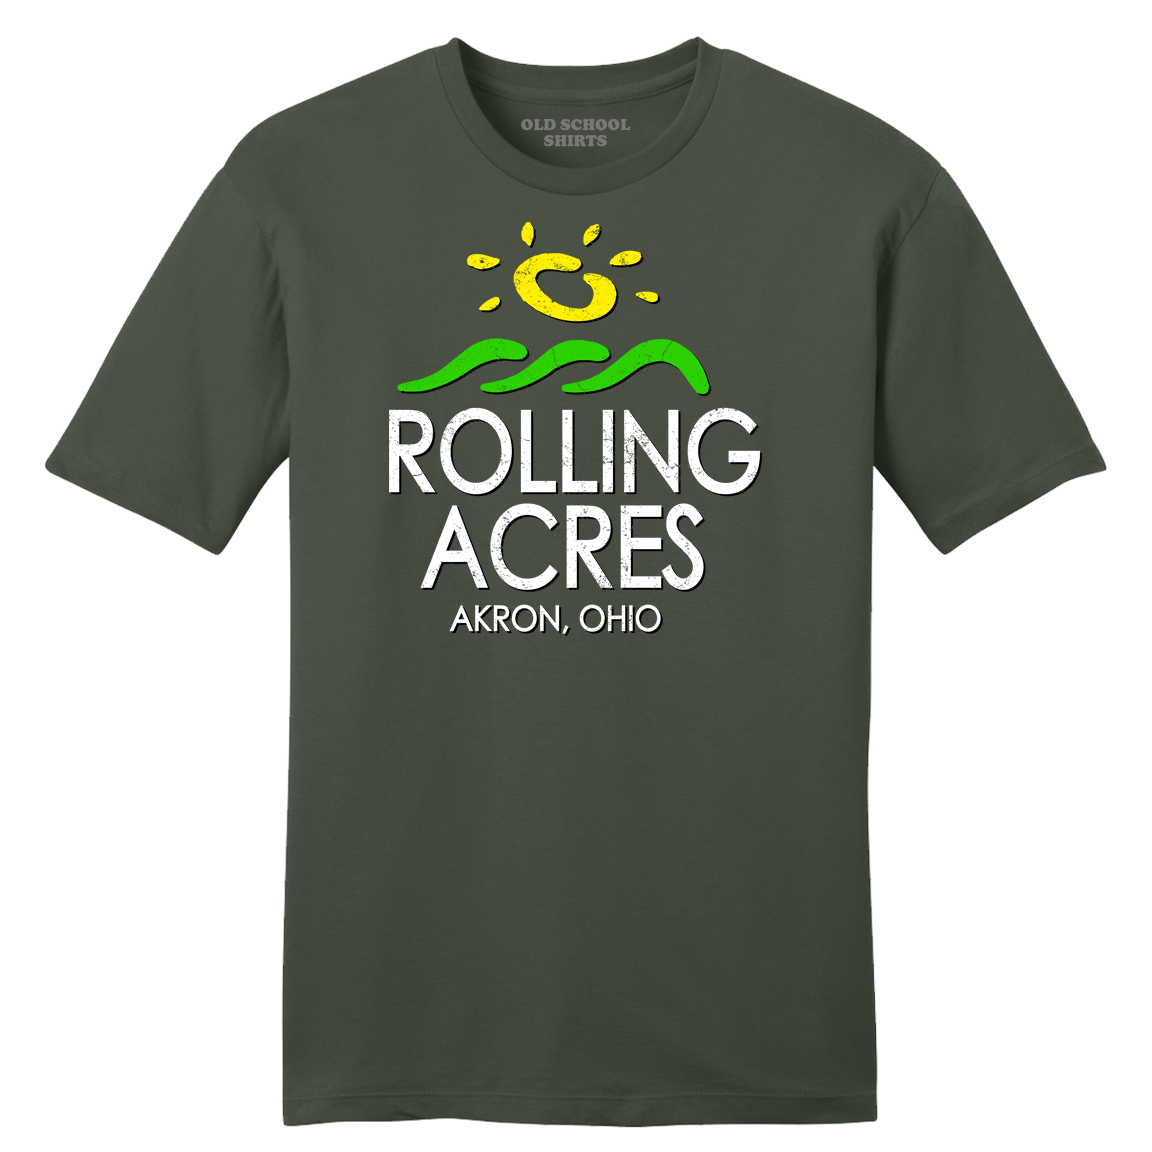 Rolling Acres Mall T-shirt